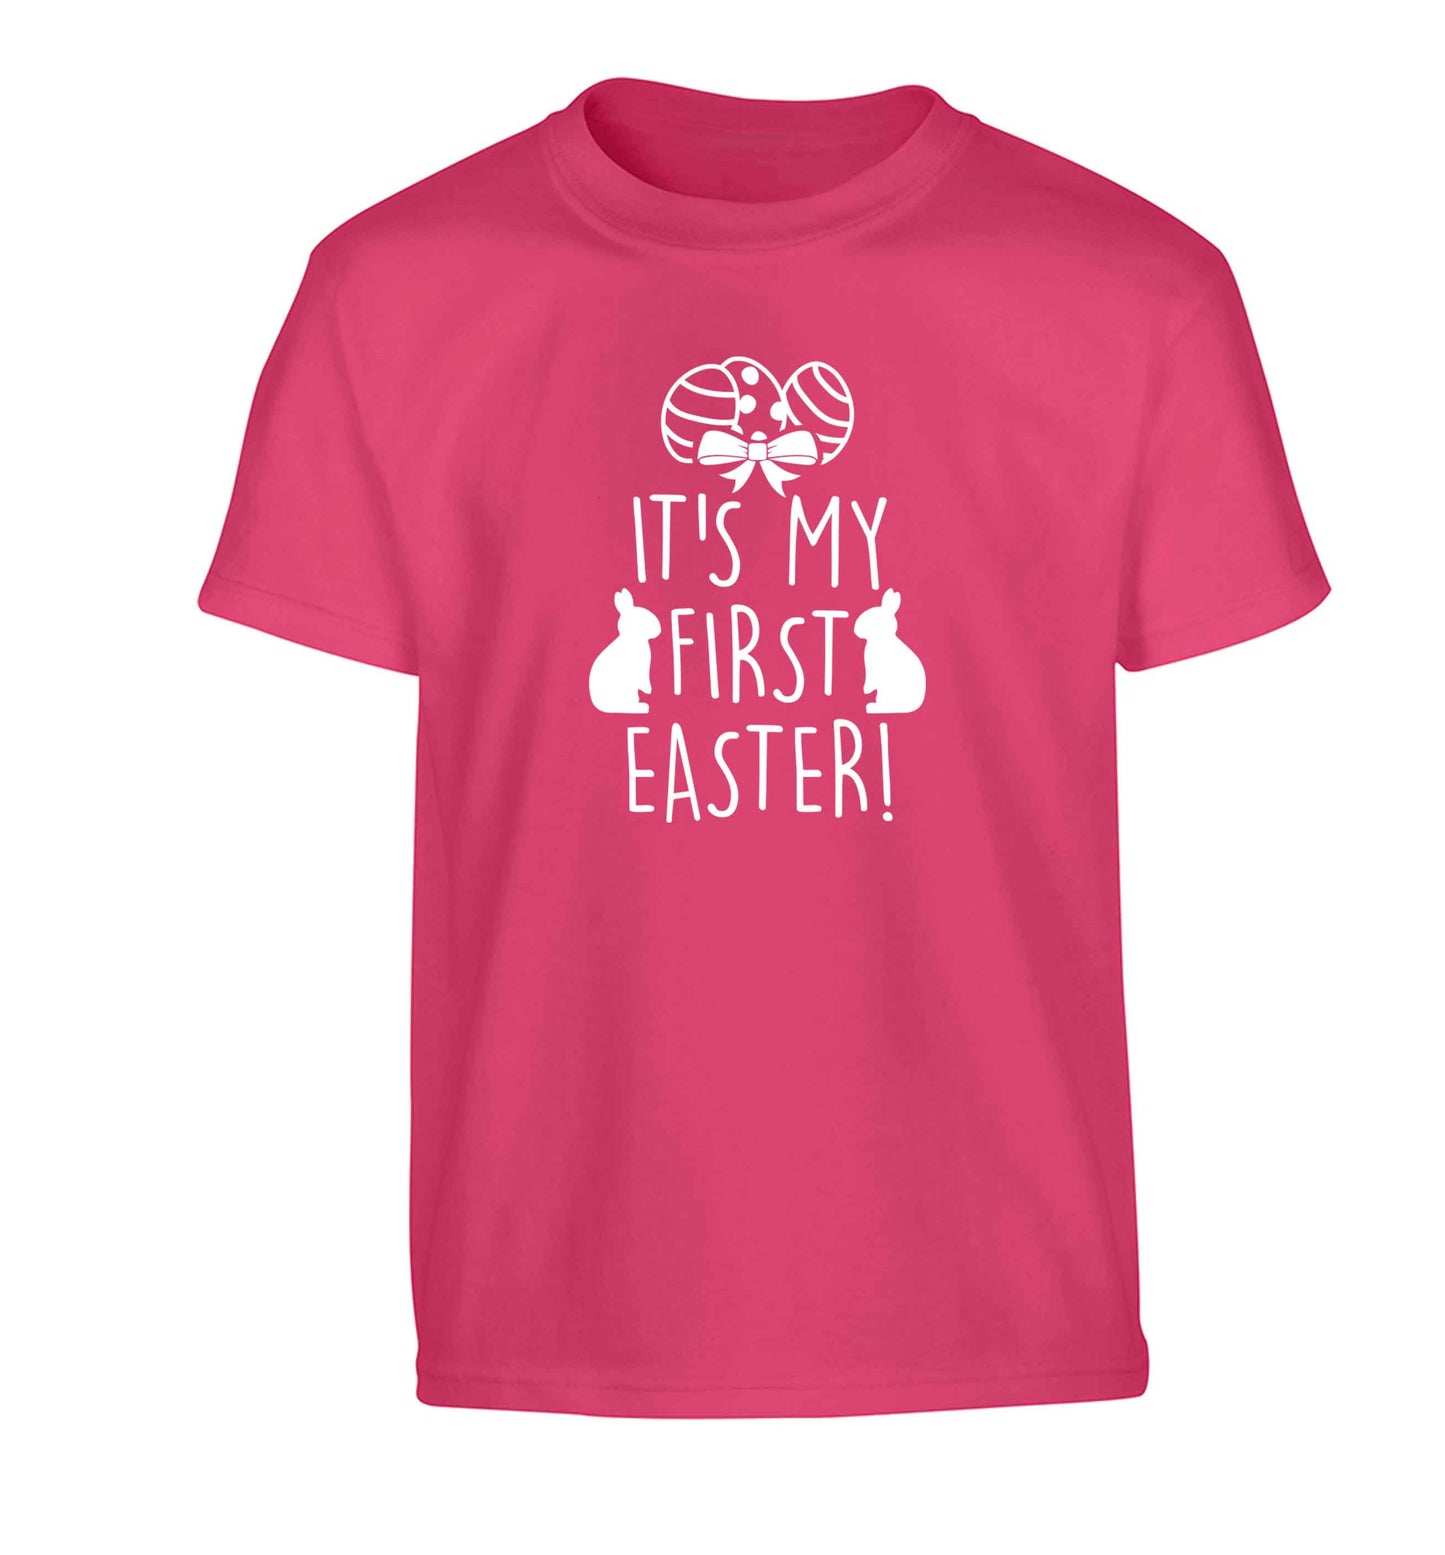 It's my first Easter Children's pink Tshirt 12-13 Years